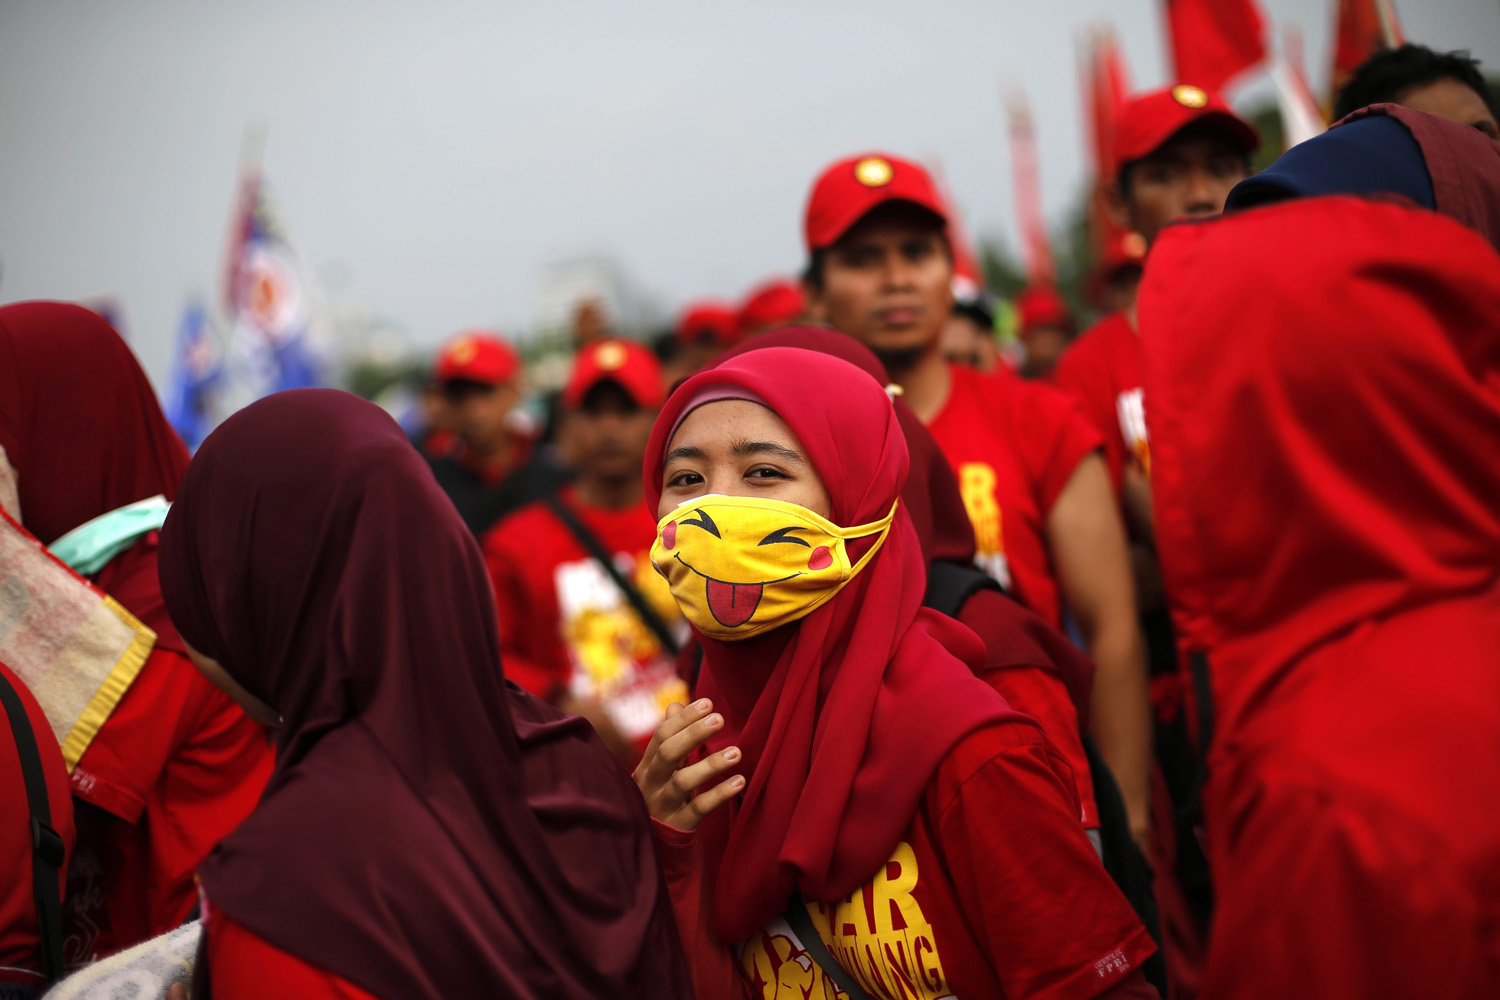 May 1, 2014. An Indonesian worker wears a pikachu Japanese character mask during a rally to mark the International Labor Day outside the presidential palace in Jakarta, Indonesia. (Nick Ut—AP)